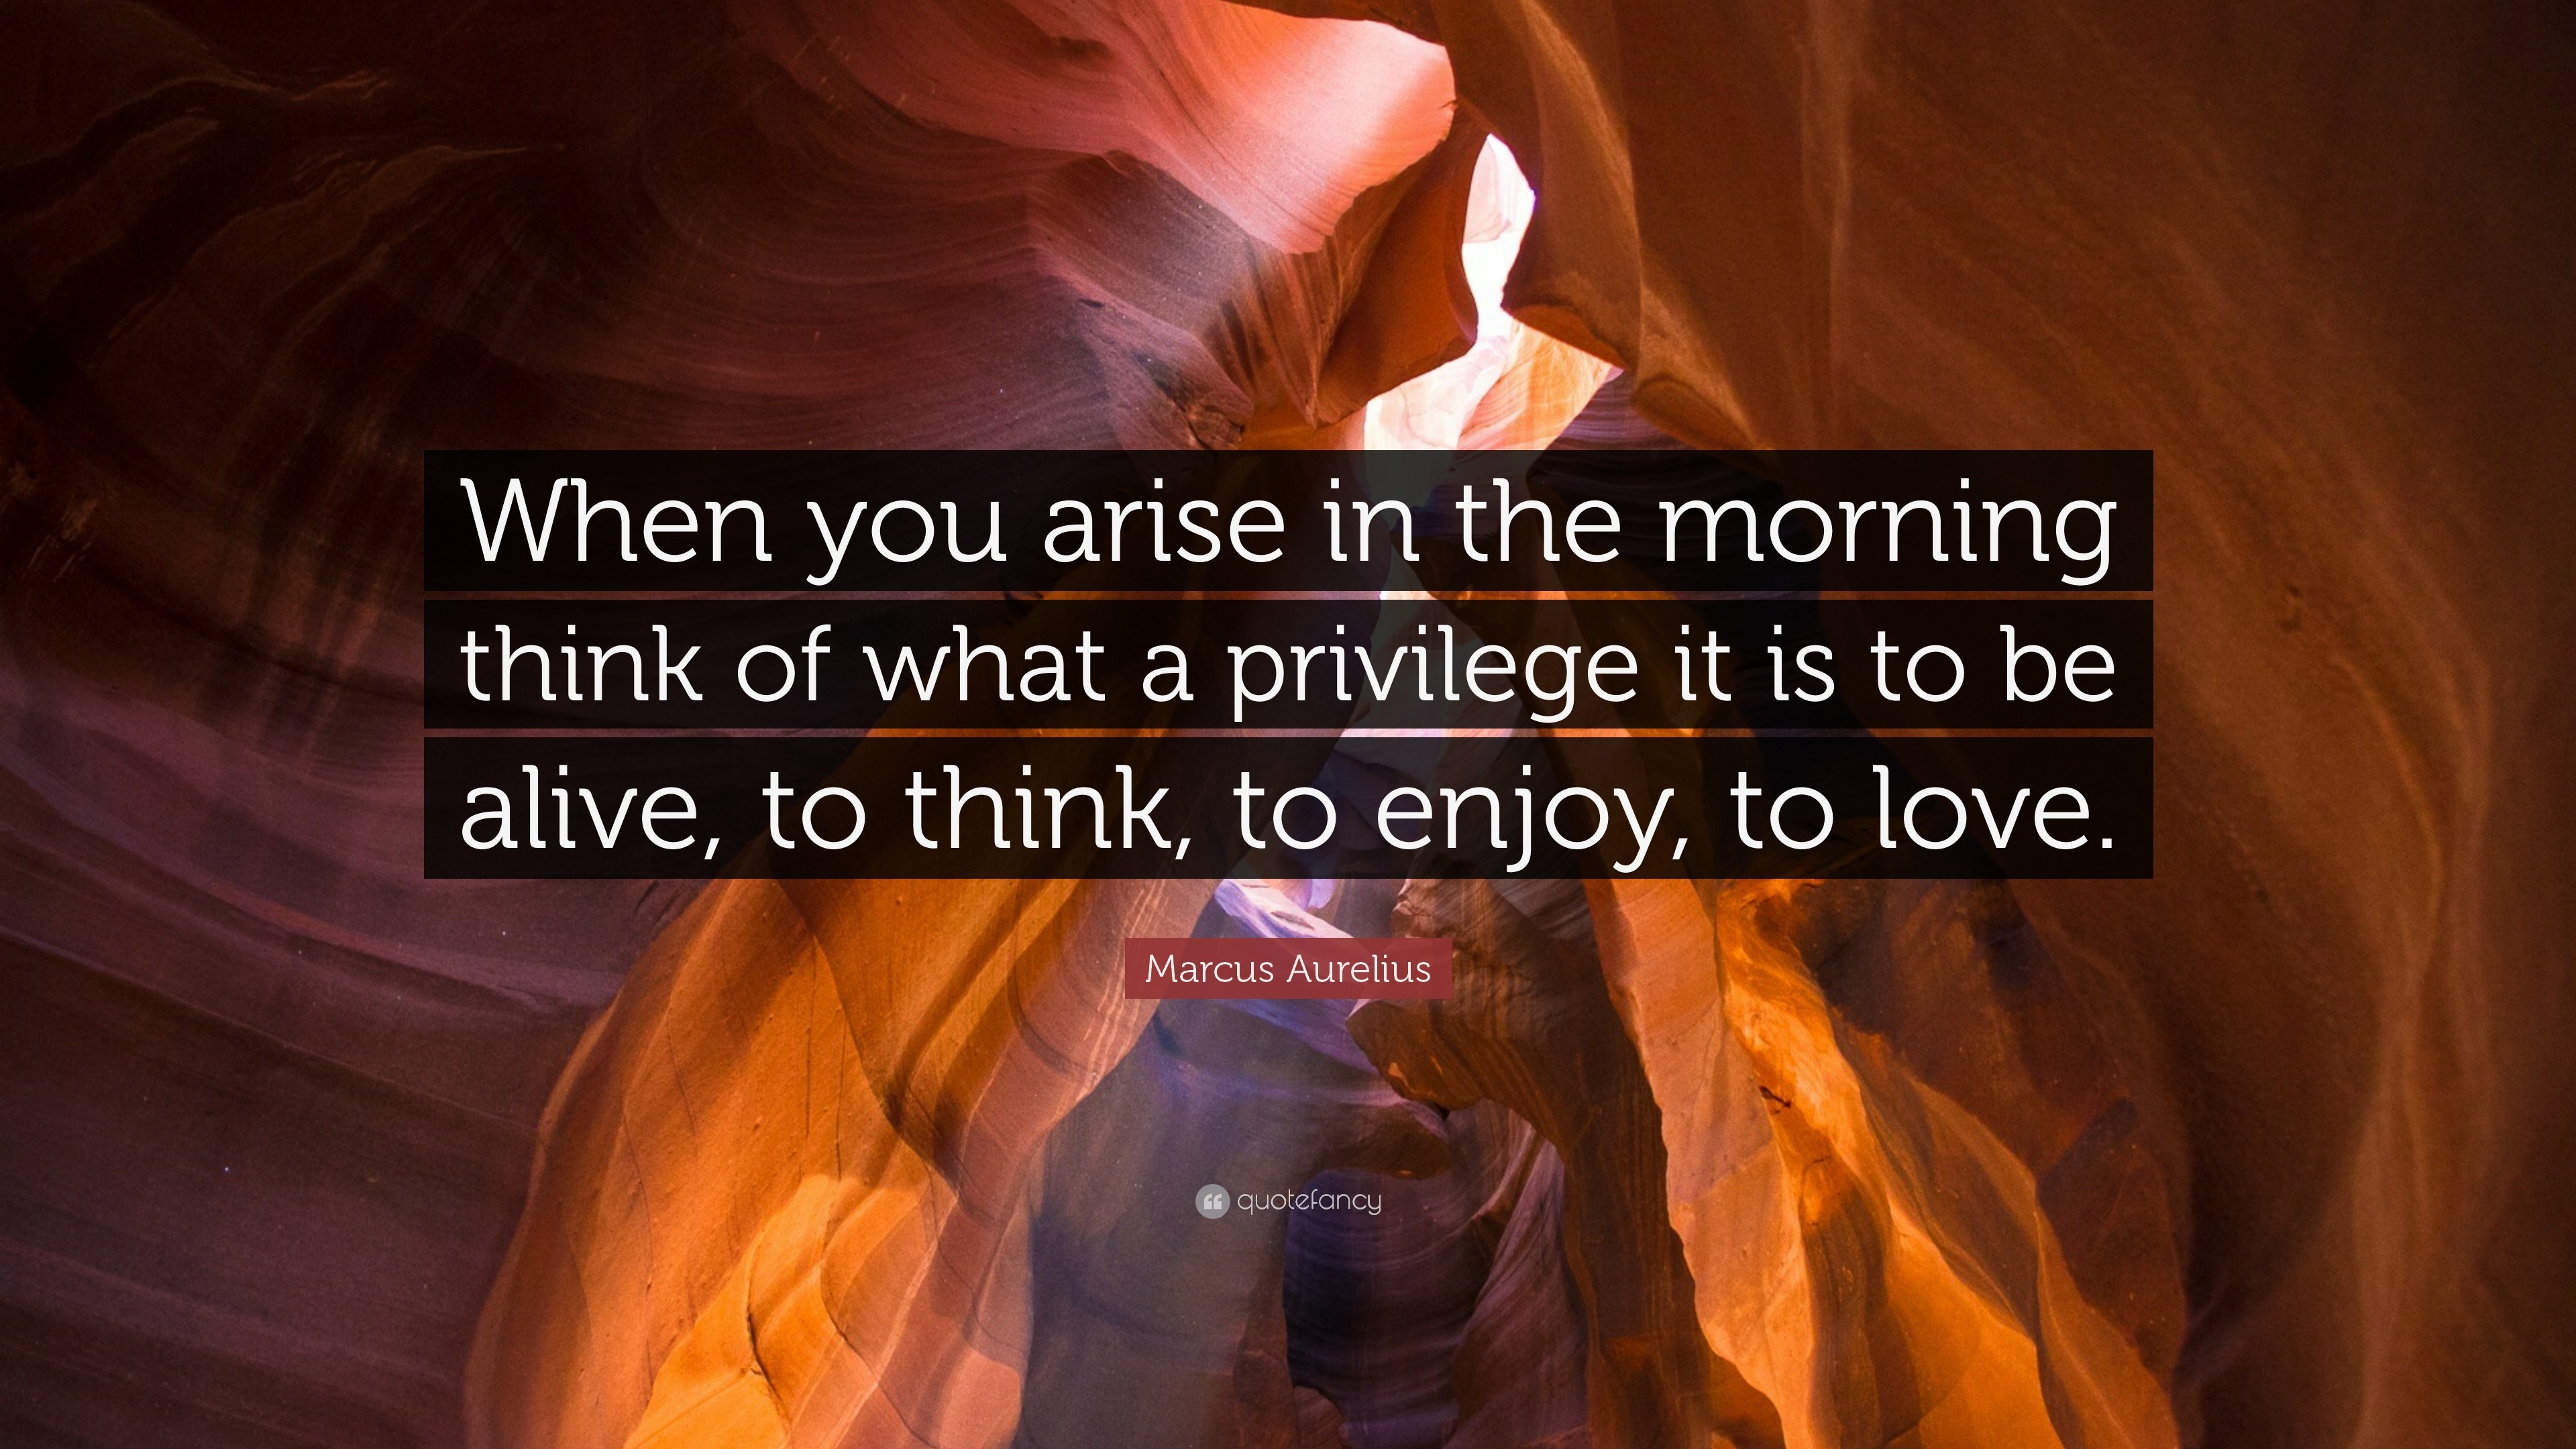 Marcus Aurelius Quote: "When you arise in the morning think of what a privilege it is to be ...